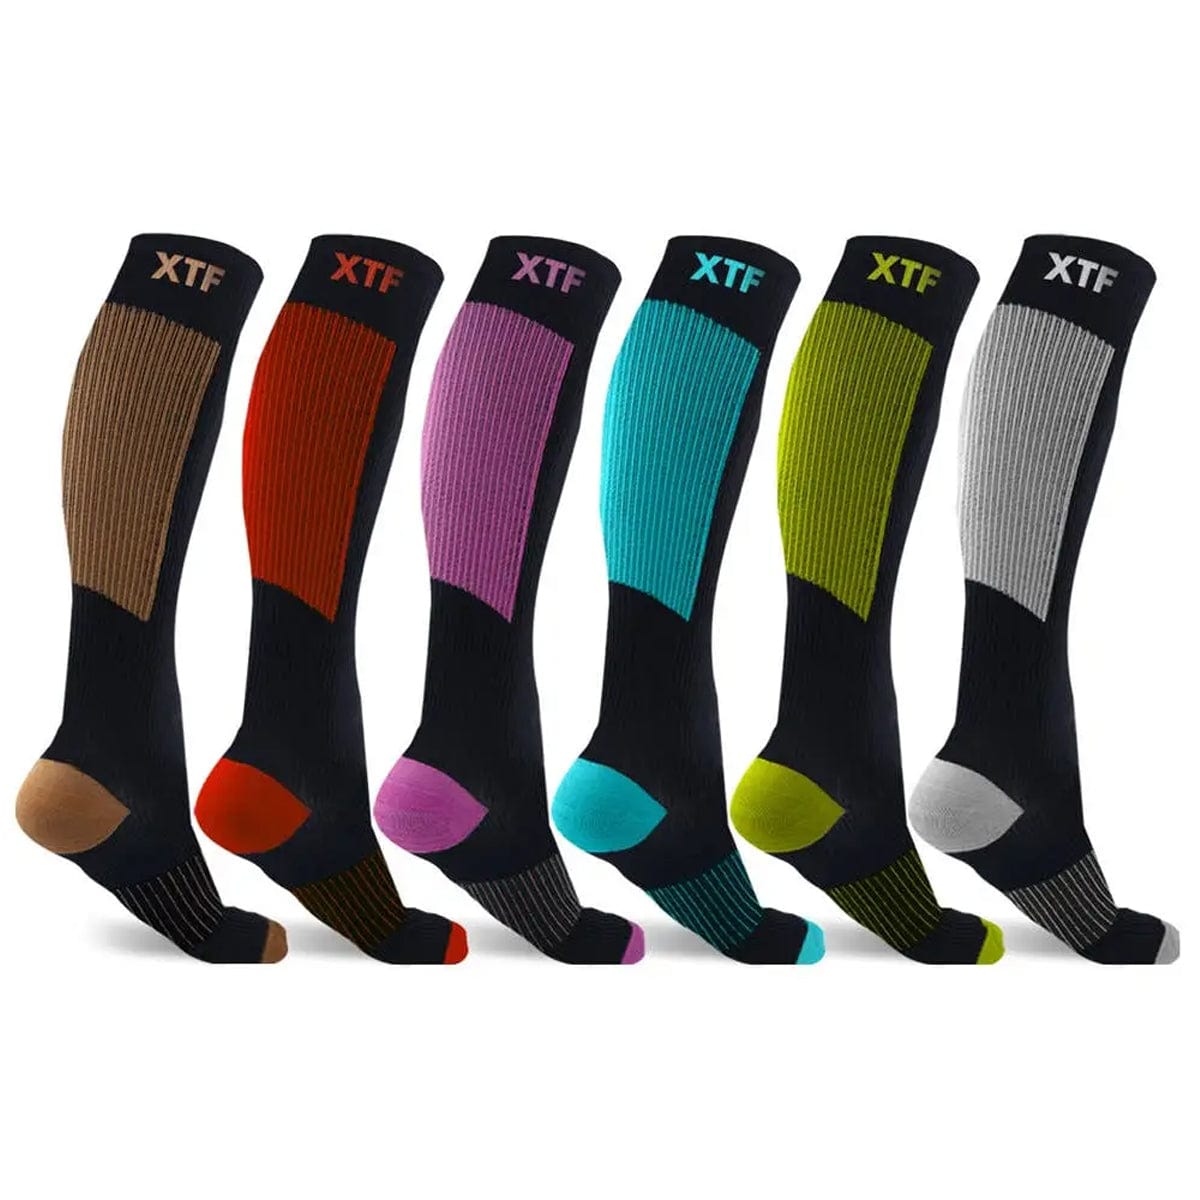 6-Pair Knee High Compression Socks for Men and Women - made for